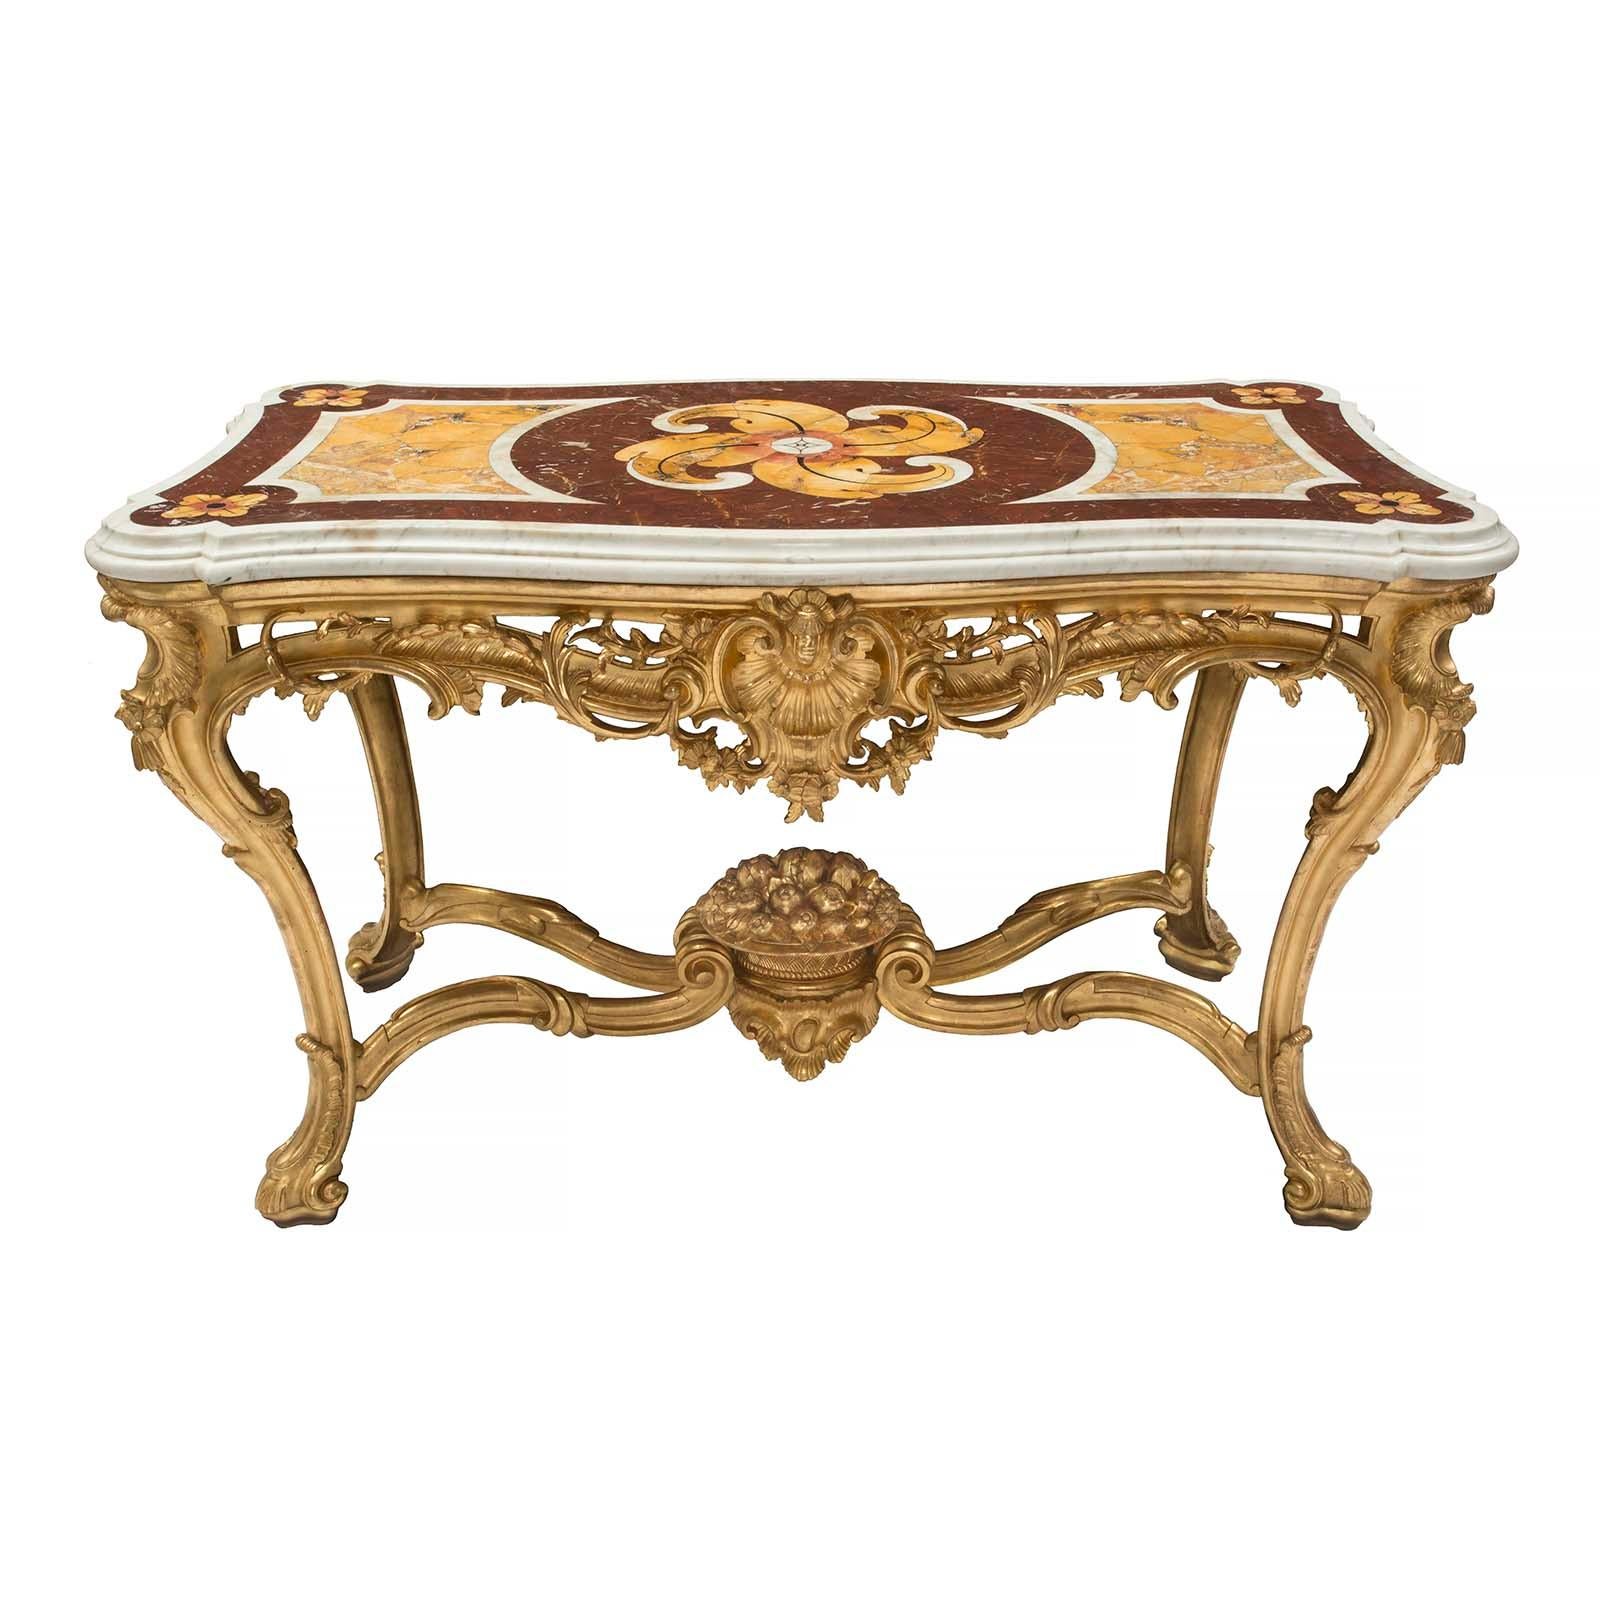 A stunning and high-quality Italian early 19th century Louis XV style giltwood and marble center table. The table is raised by elegantly scrolled legs accented with carved acanthus leaves. The legs are joined by a striking scrolled X-shaped